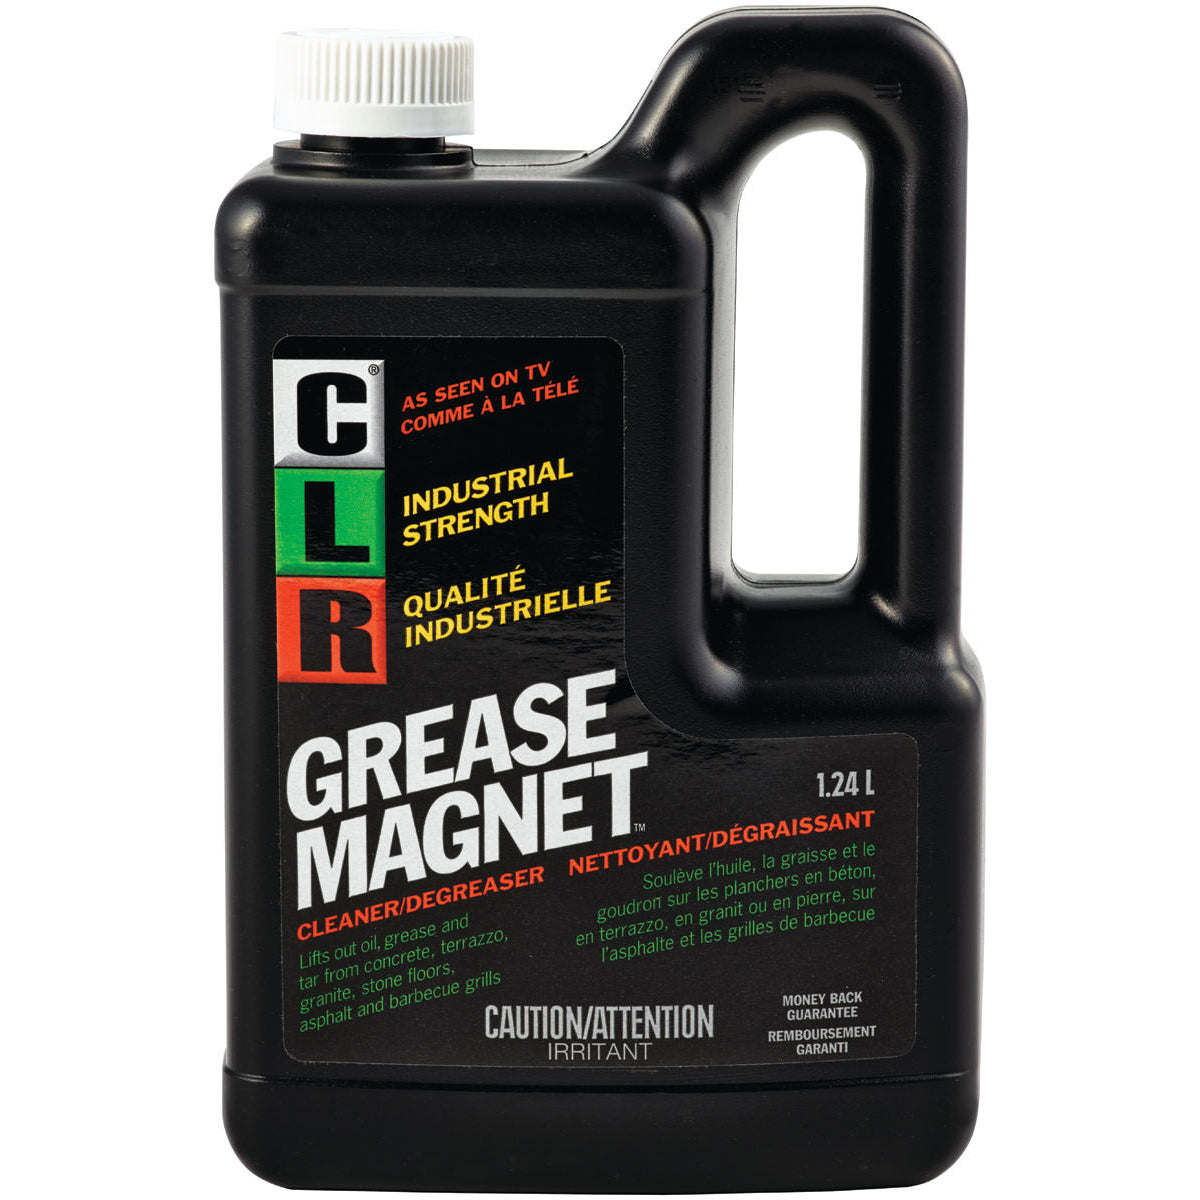 CLR GRSE MGNT 1.24L UNSCENTED